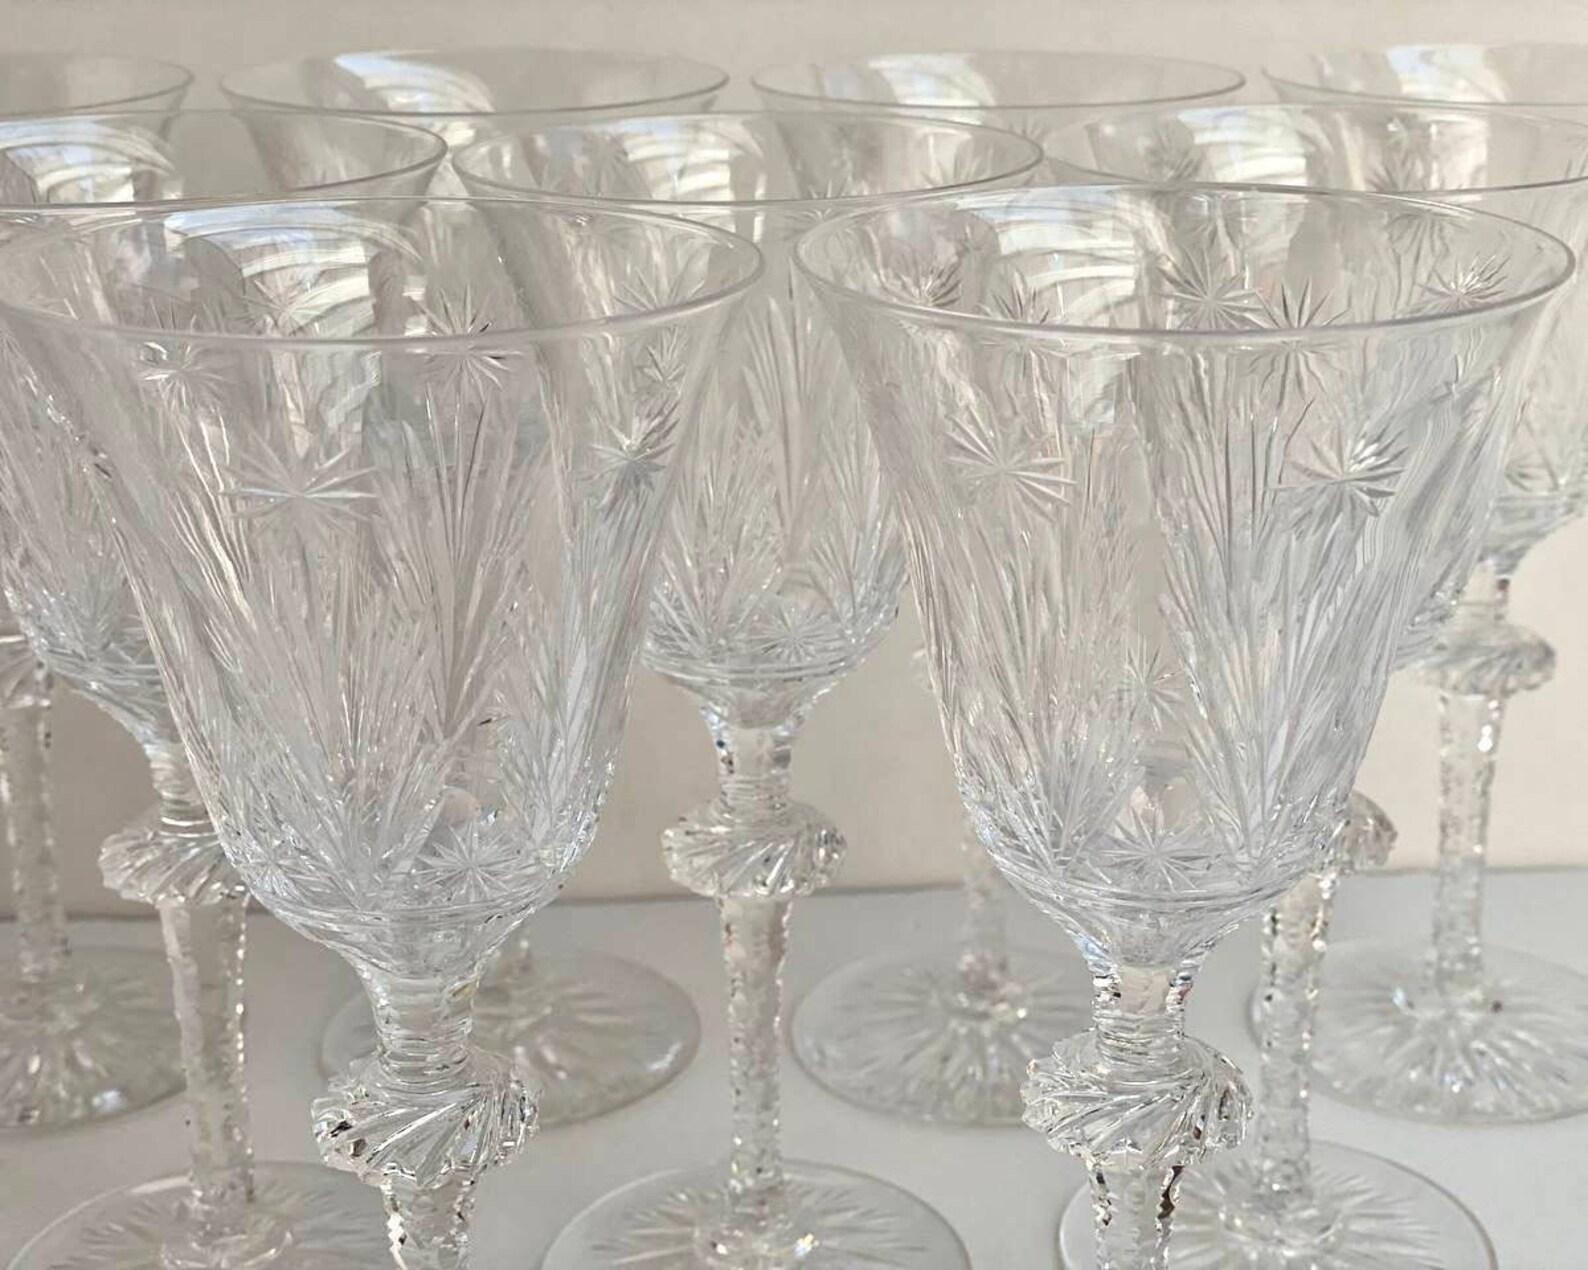 Charming vintage crystal wine or champagne glasses, set 9 pieces, produced in Germany by Glasfabrik Barthmann, circa 1960s. 

Barthmann glasses are famous for their unsurpassed beauty and royal splendor. 

Colorless cut and 30% lead oxide